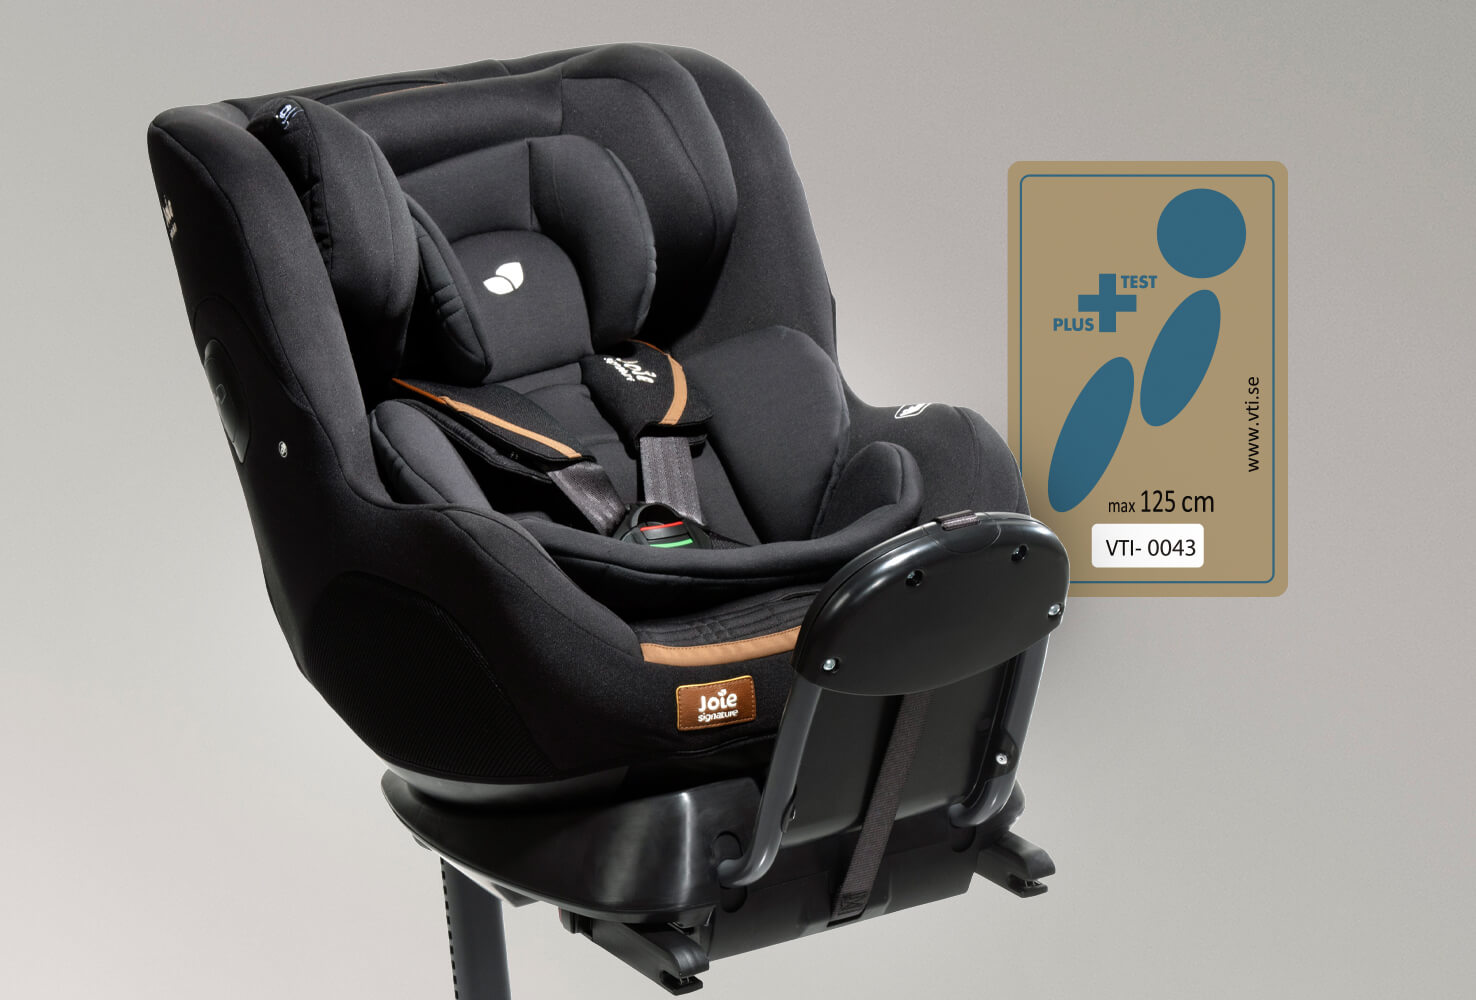   Joie Signature I-Prodigi in carbon gray and black with the swedish plus test badge